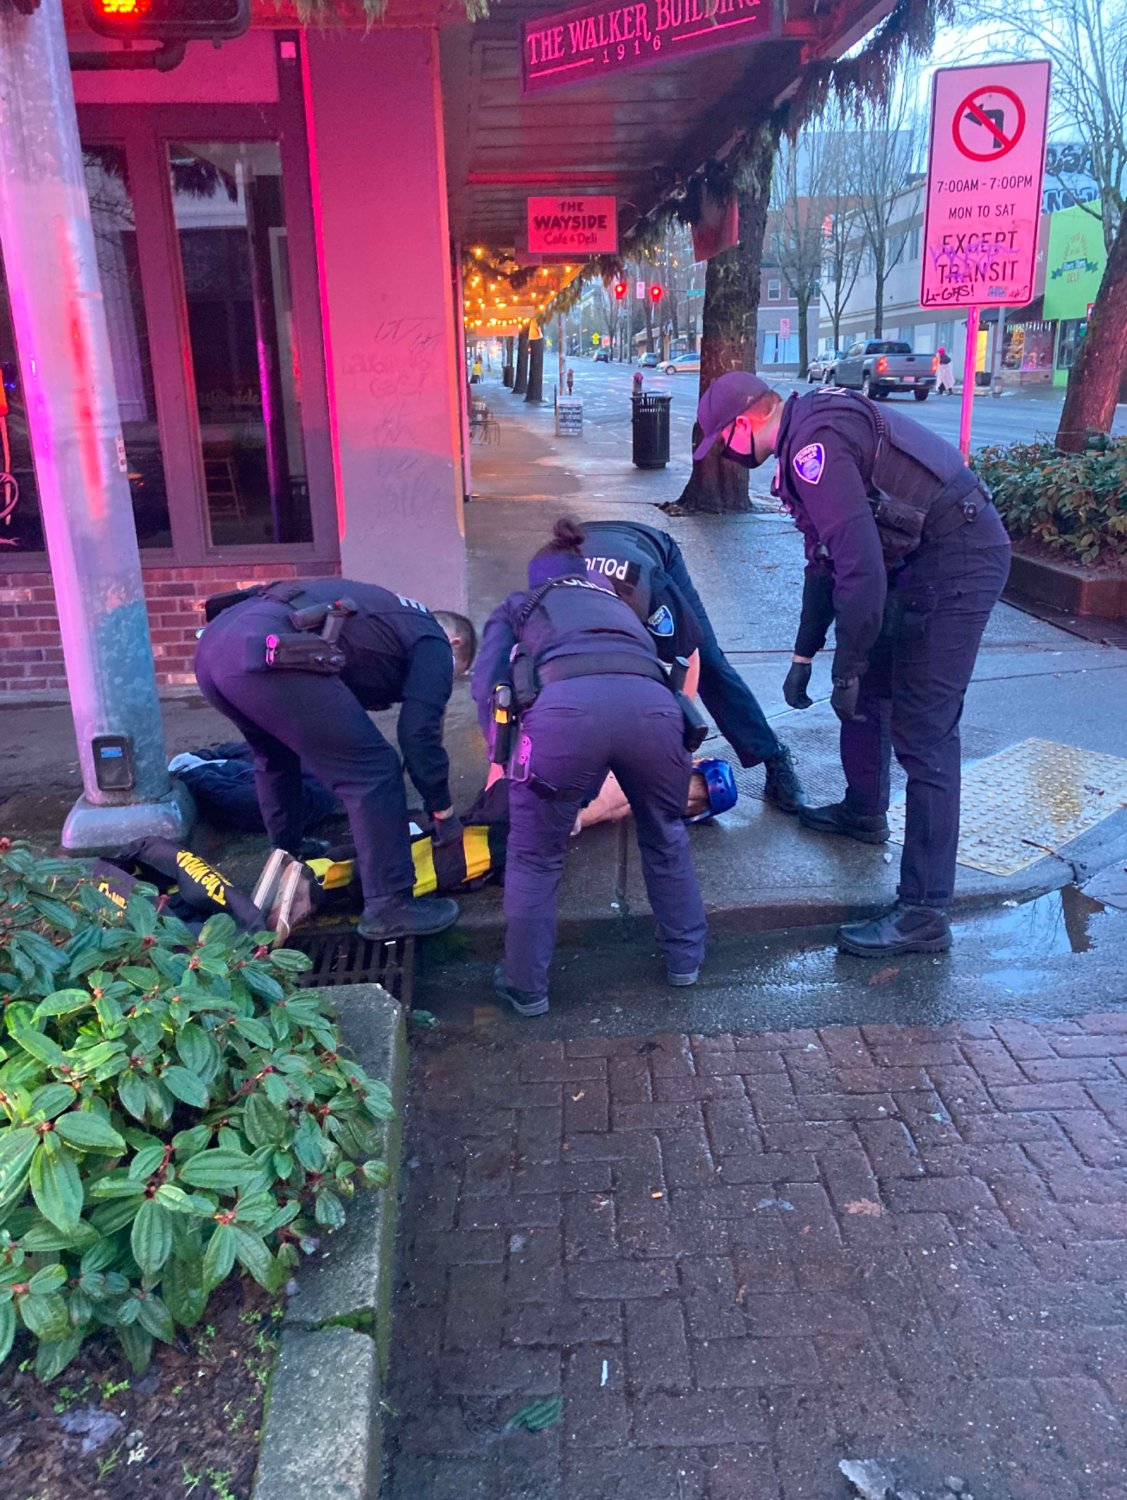 Four officers were involved in the Jan. 4 arrest of Riley James Evans in downtown Olympia.